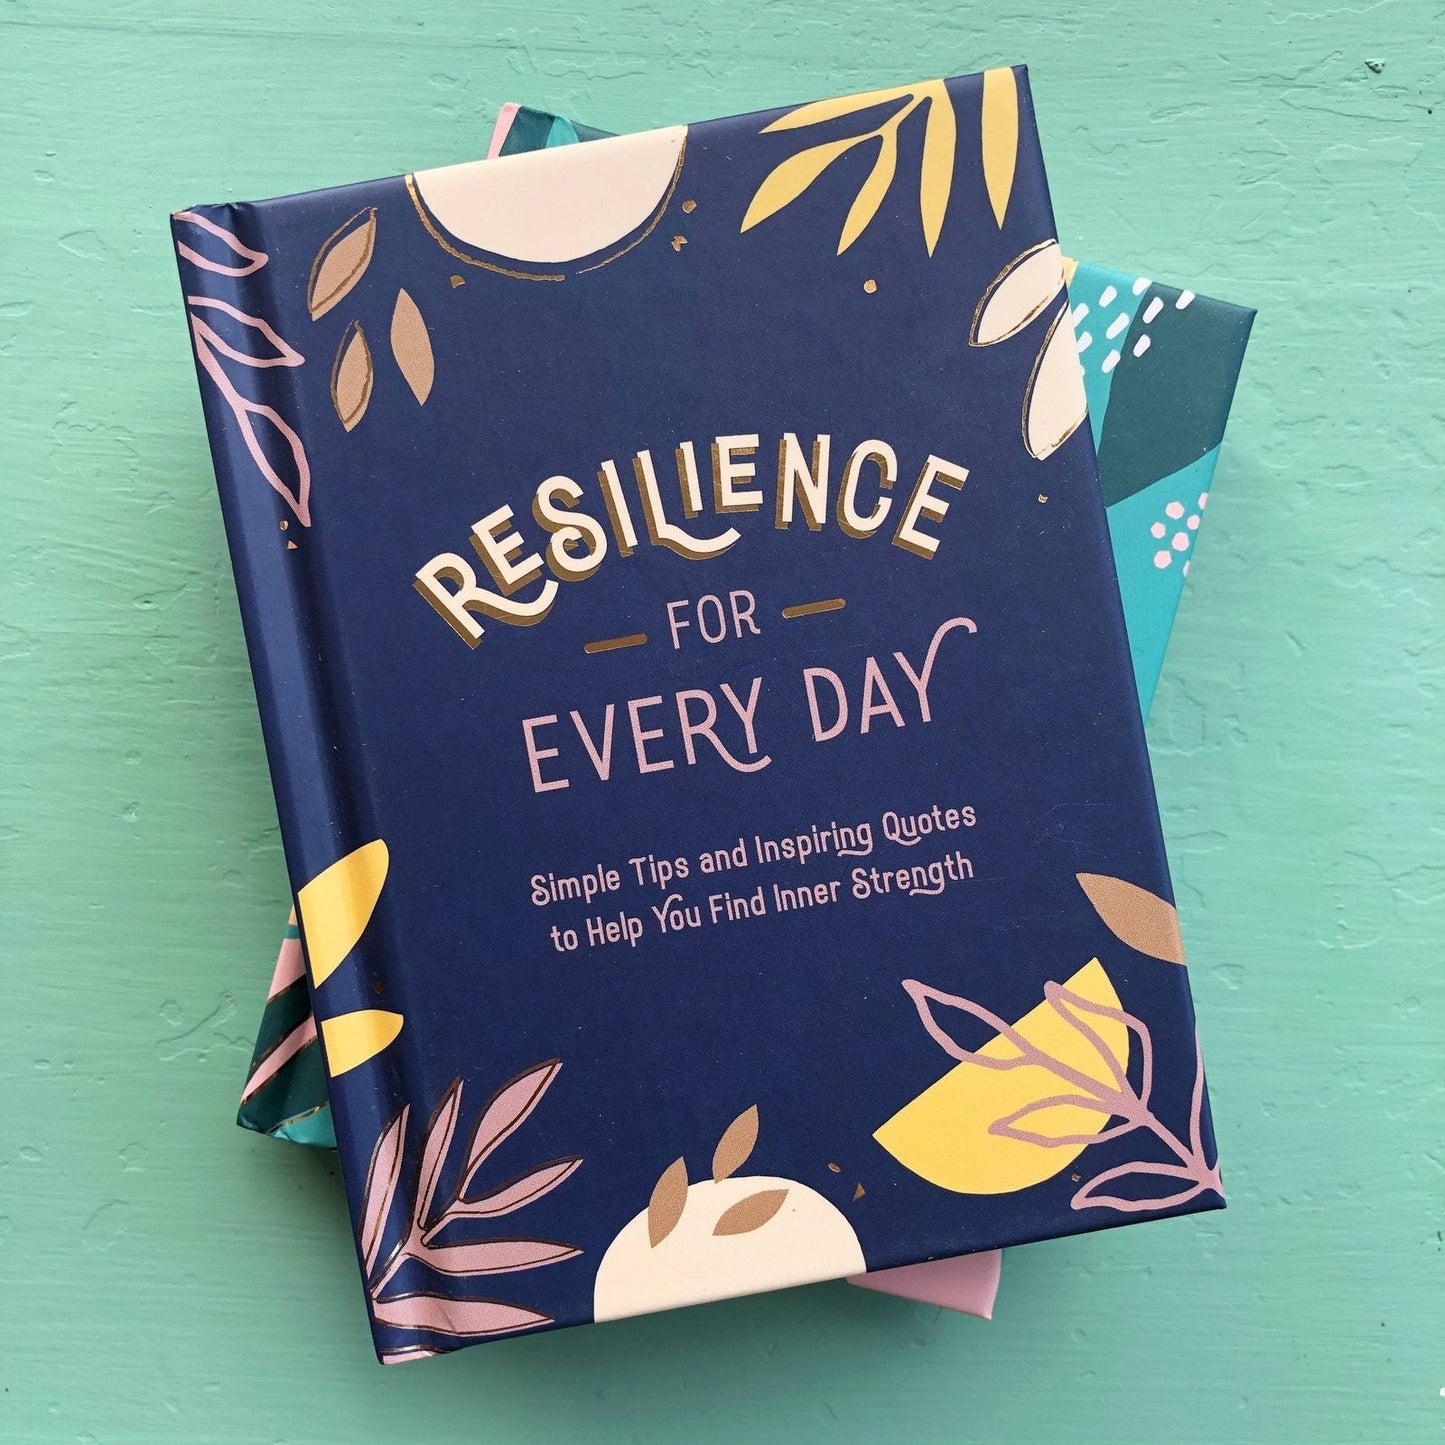 Resilience for Every Day